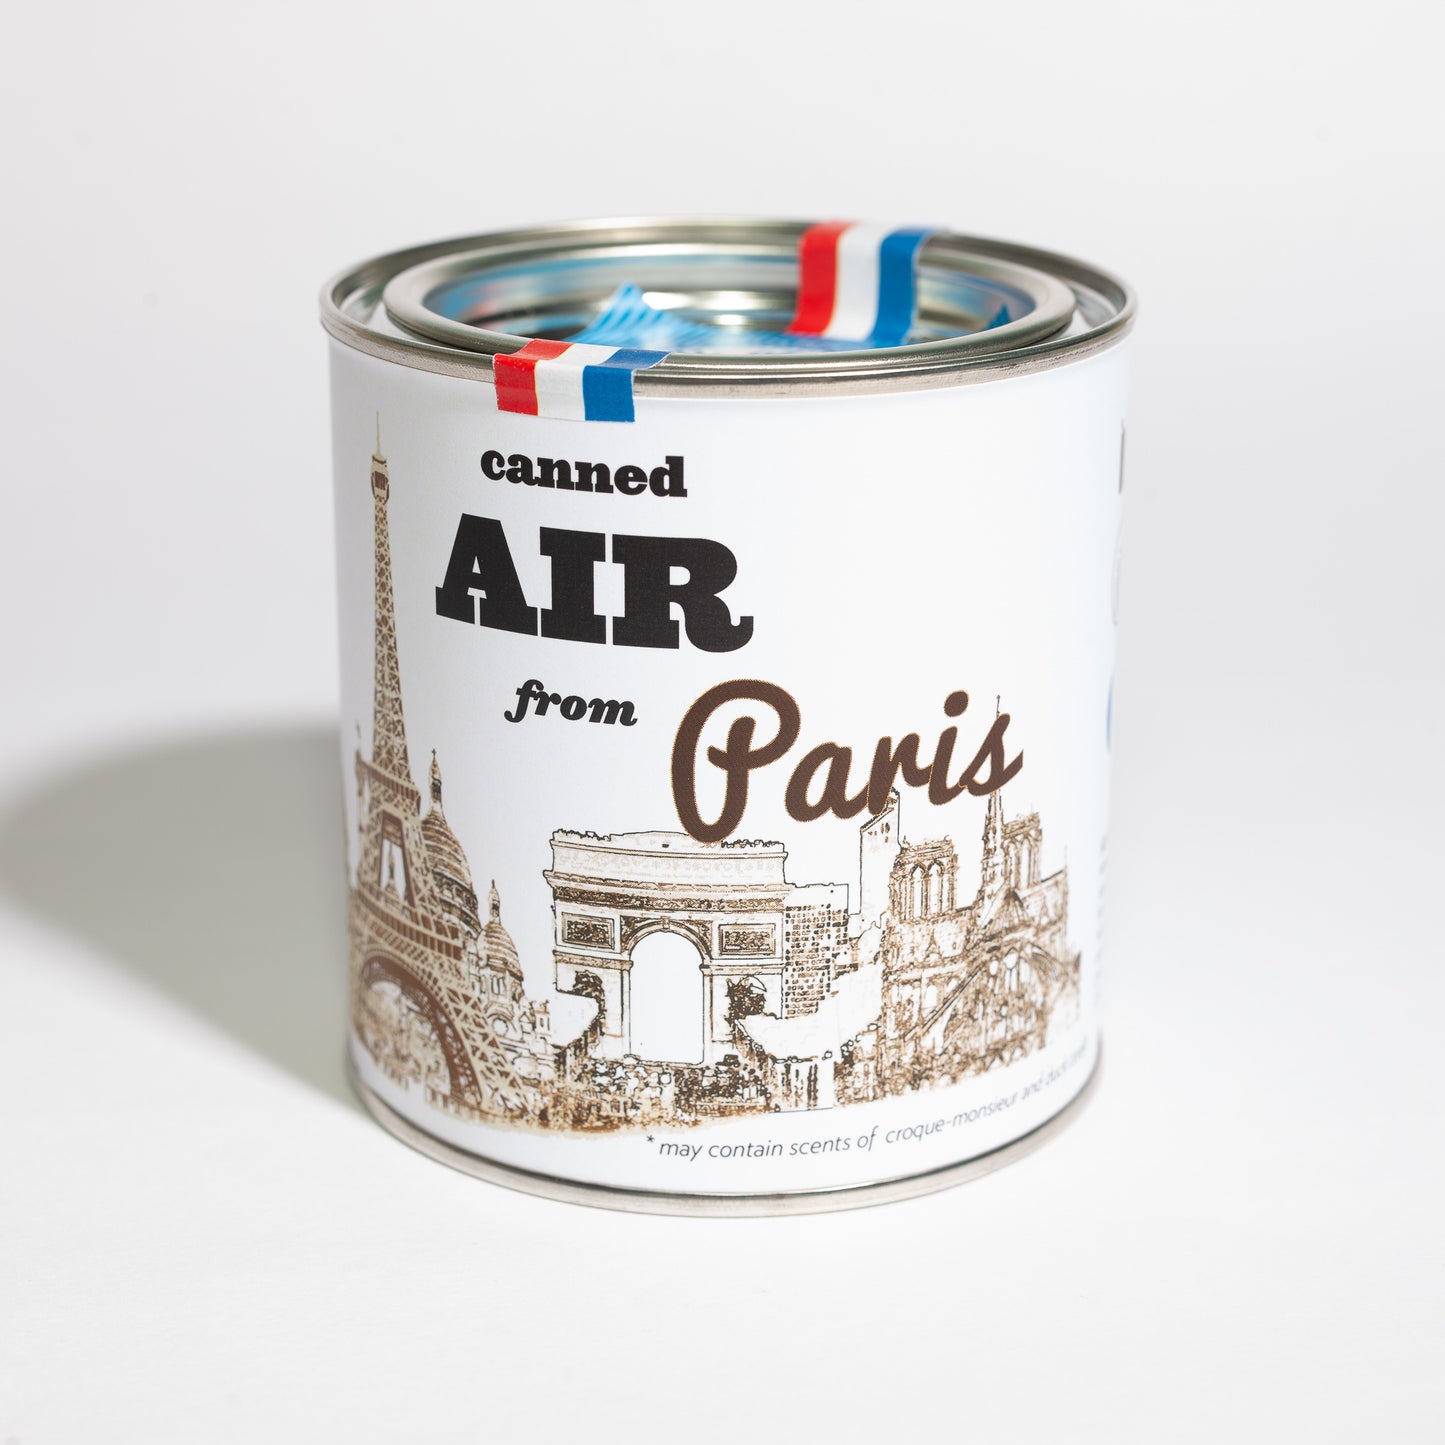 Canned Air of Paris